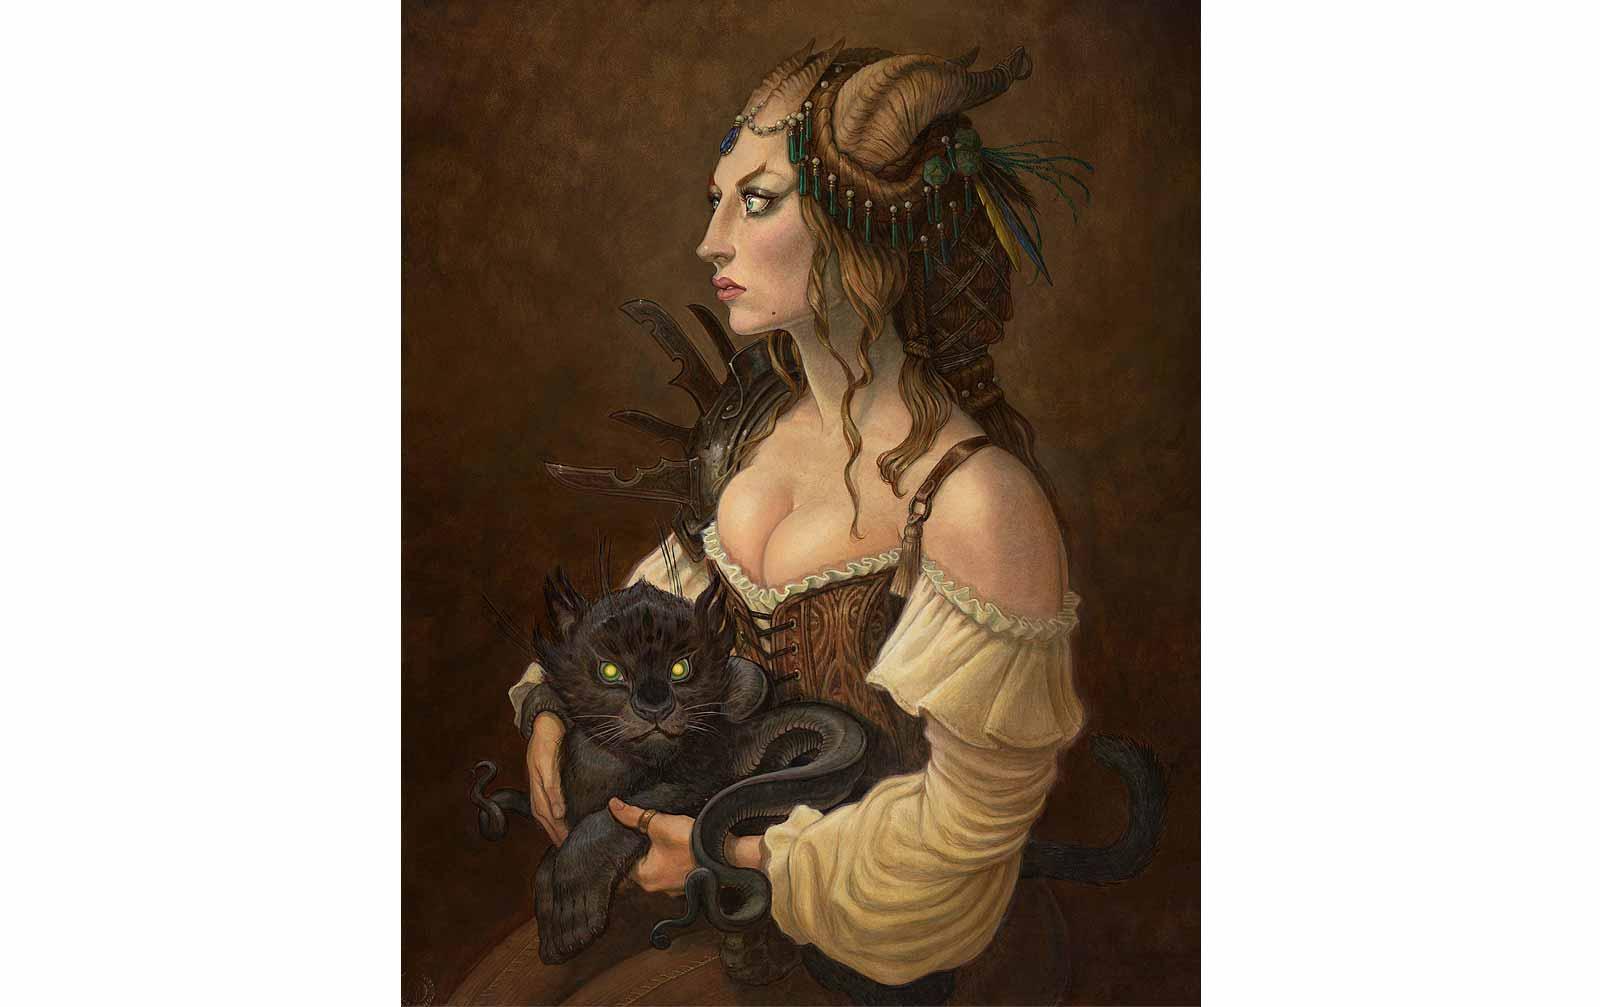 Tony DiTerlizzi, Portrait of a Young Tiefling, 2015.